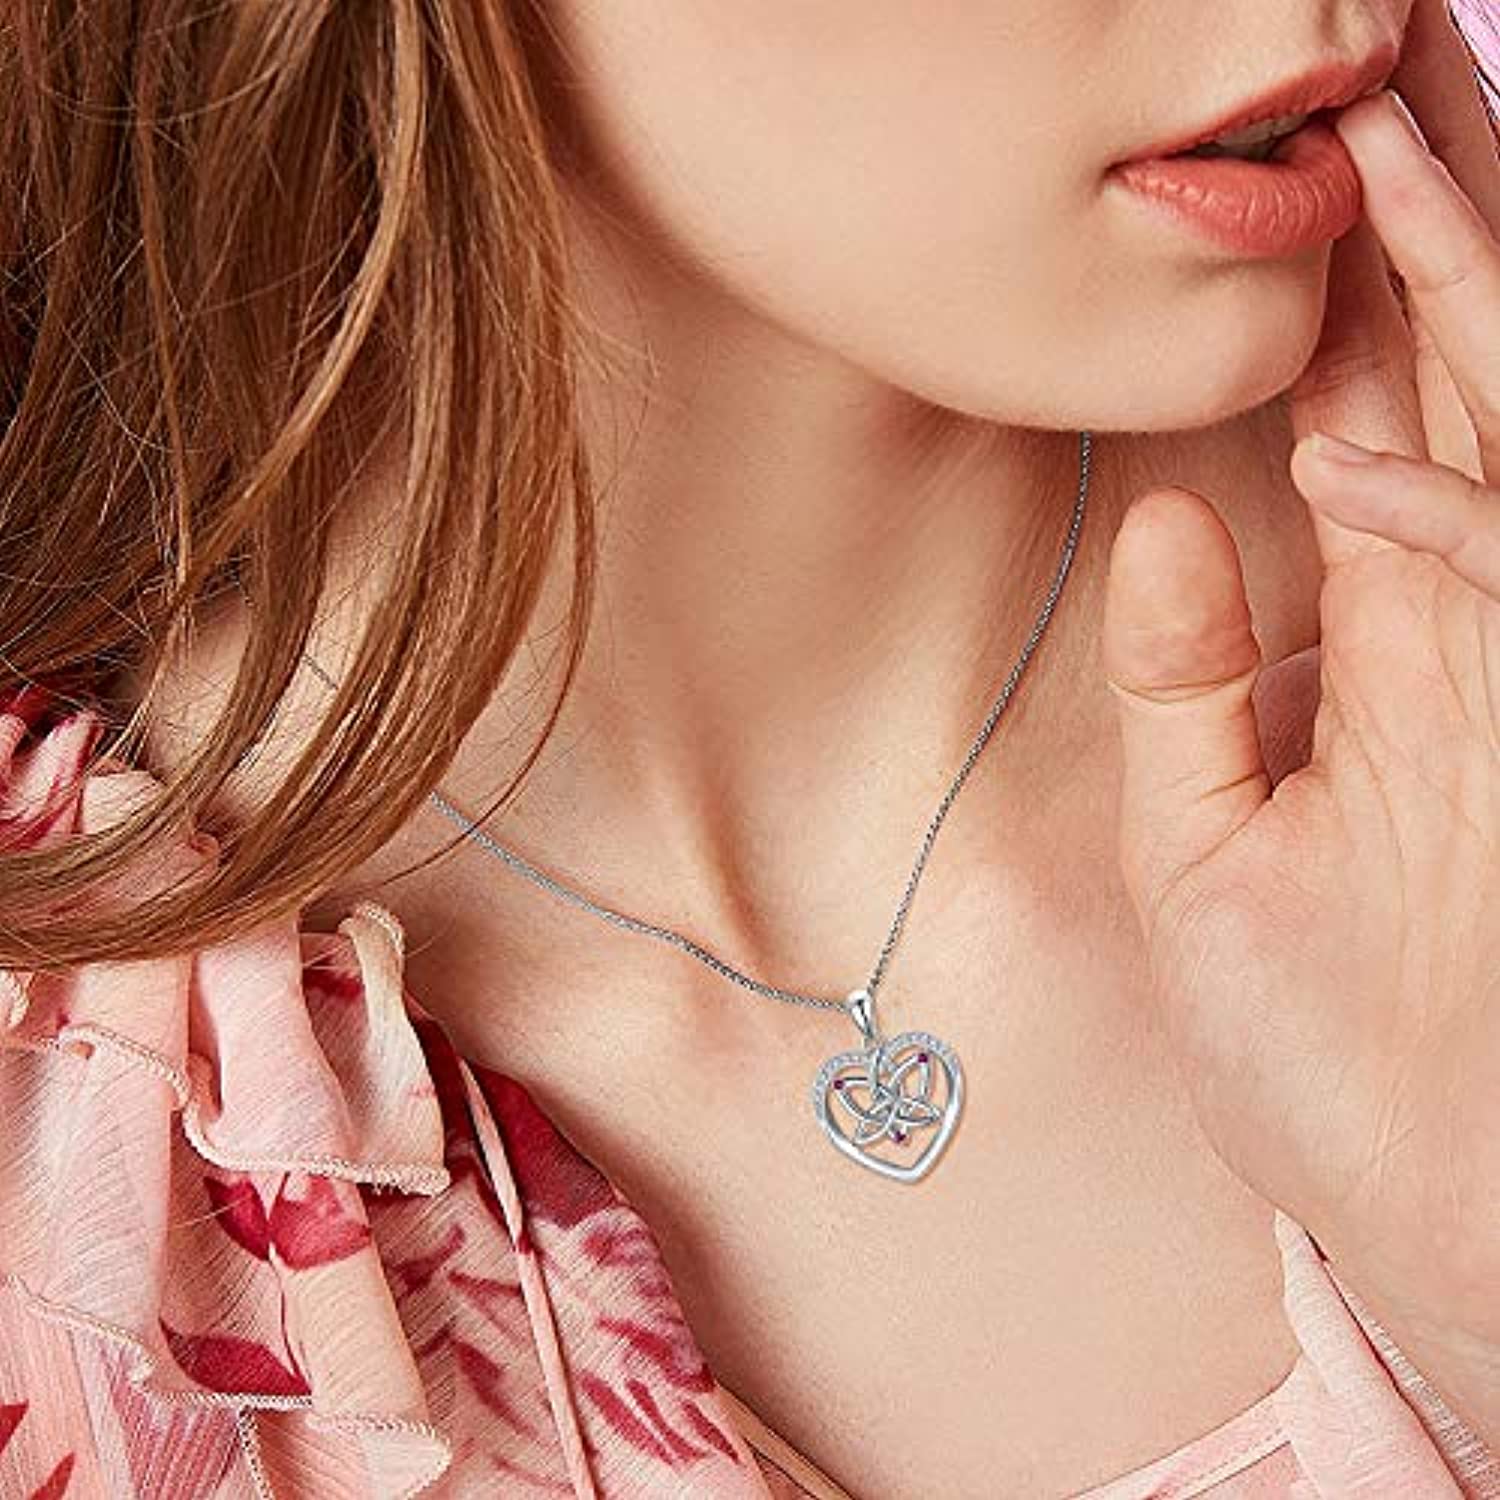 Celtic Knot Necklace, Triquetra Love Heart Pendant Necklace Good Luck Irish 925 Sterling Silver with Box Chain 18inches Gift for Women